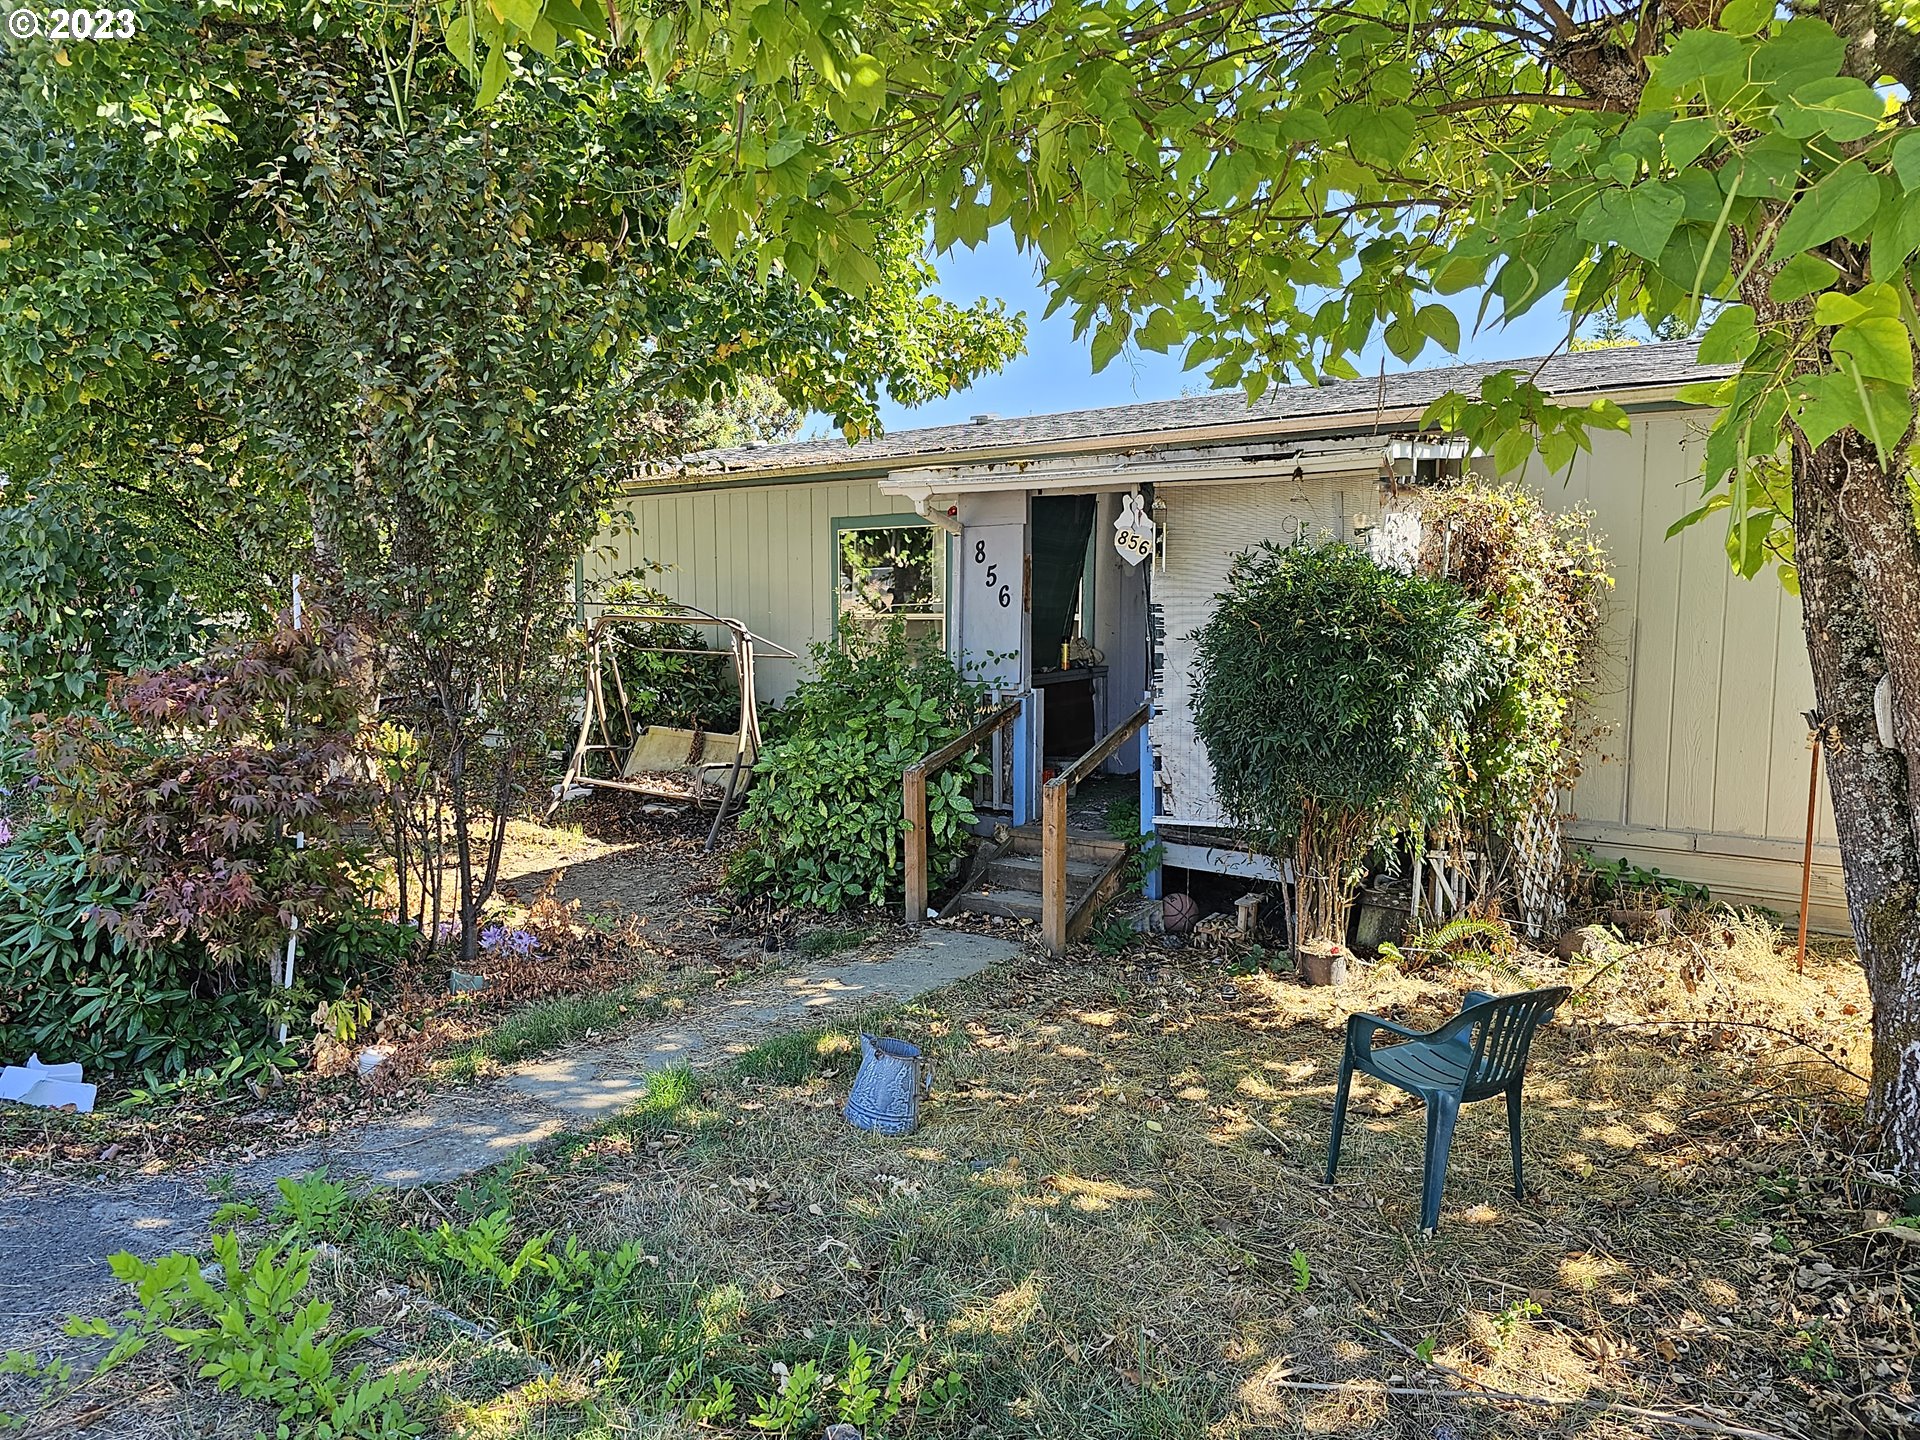 INVESTOR ALERT!This 3 bedroom, 2 bath manufactured home is a fixer on a level lot in the heart of Sutherlin. Fenced backyard has great potential for peace and privacy. Home is located on a dead-end street just minutes away from schools and shopping. Bring this home back to life as an investment property or for owner occupancy. Being sold AS-IS. New roof was installed in 2018.